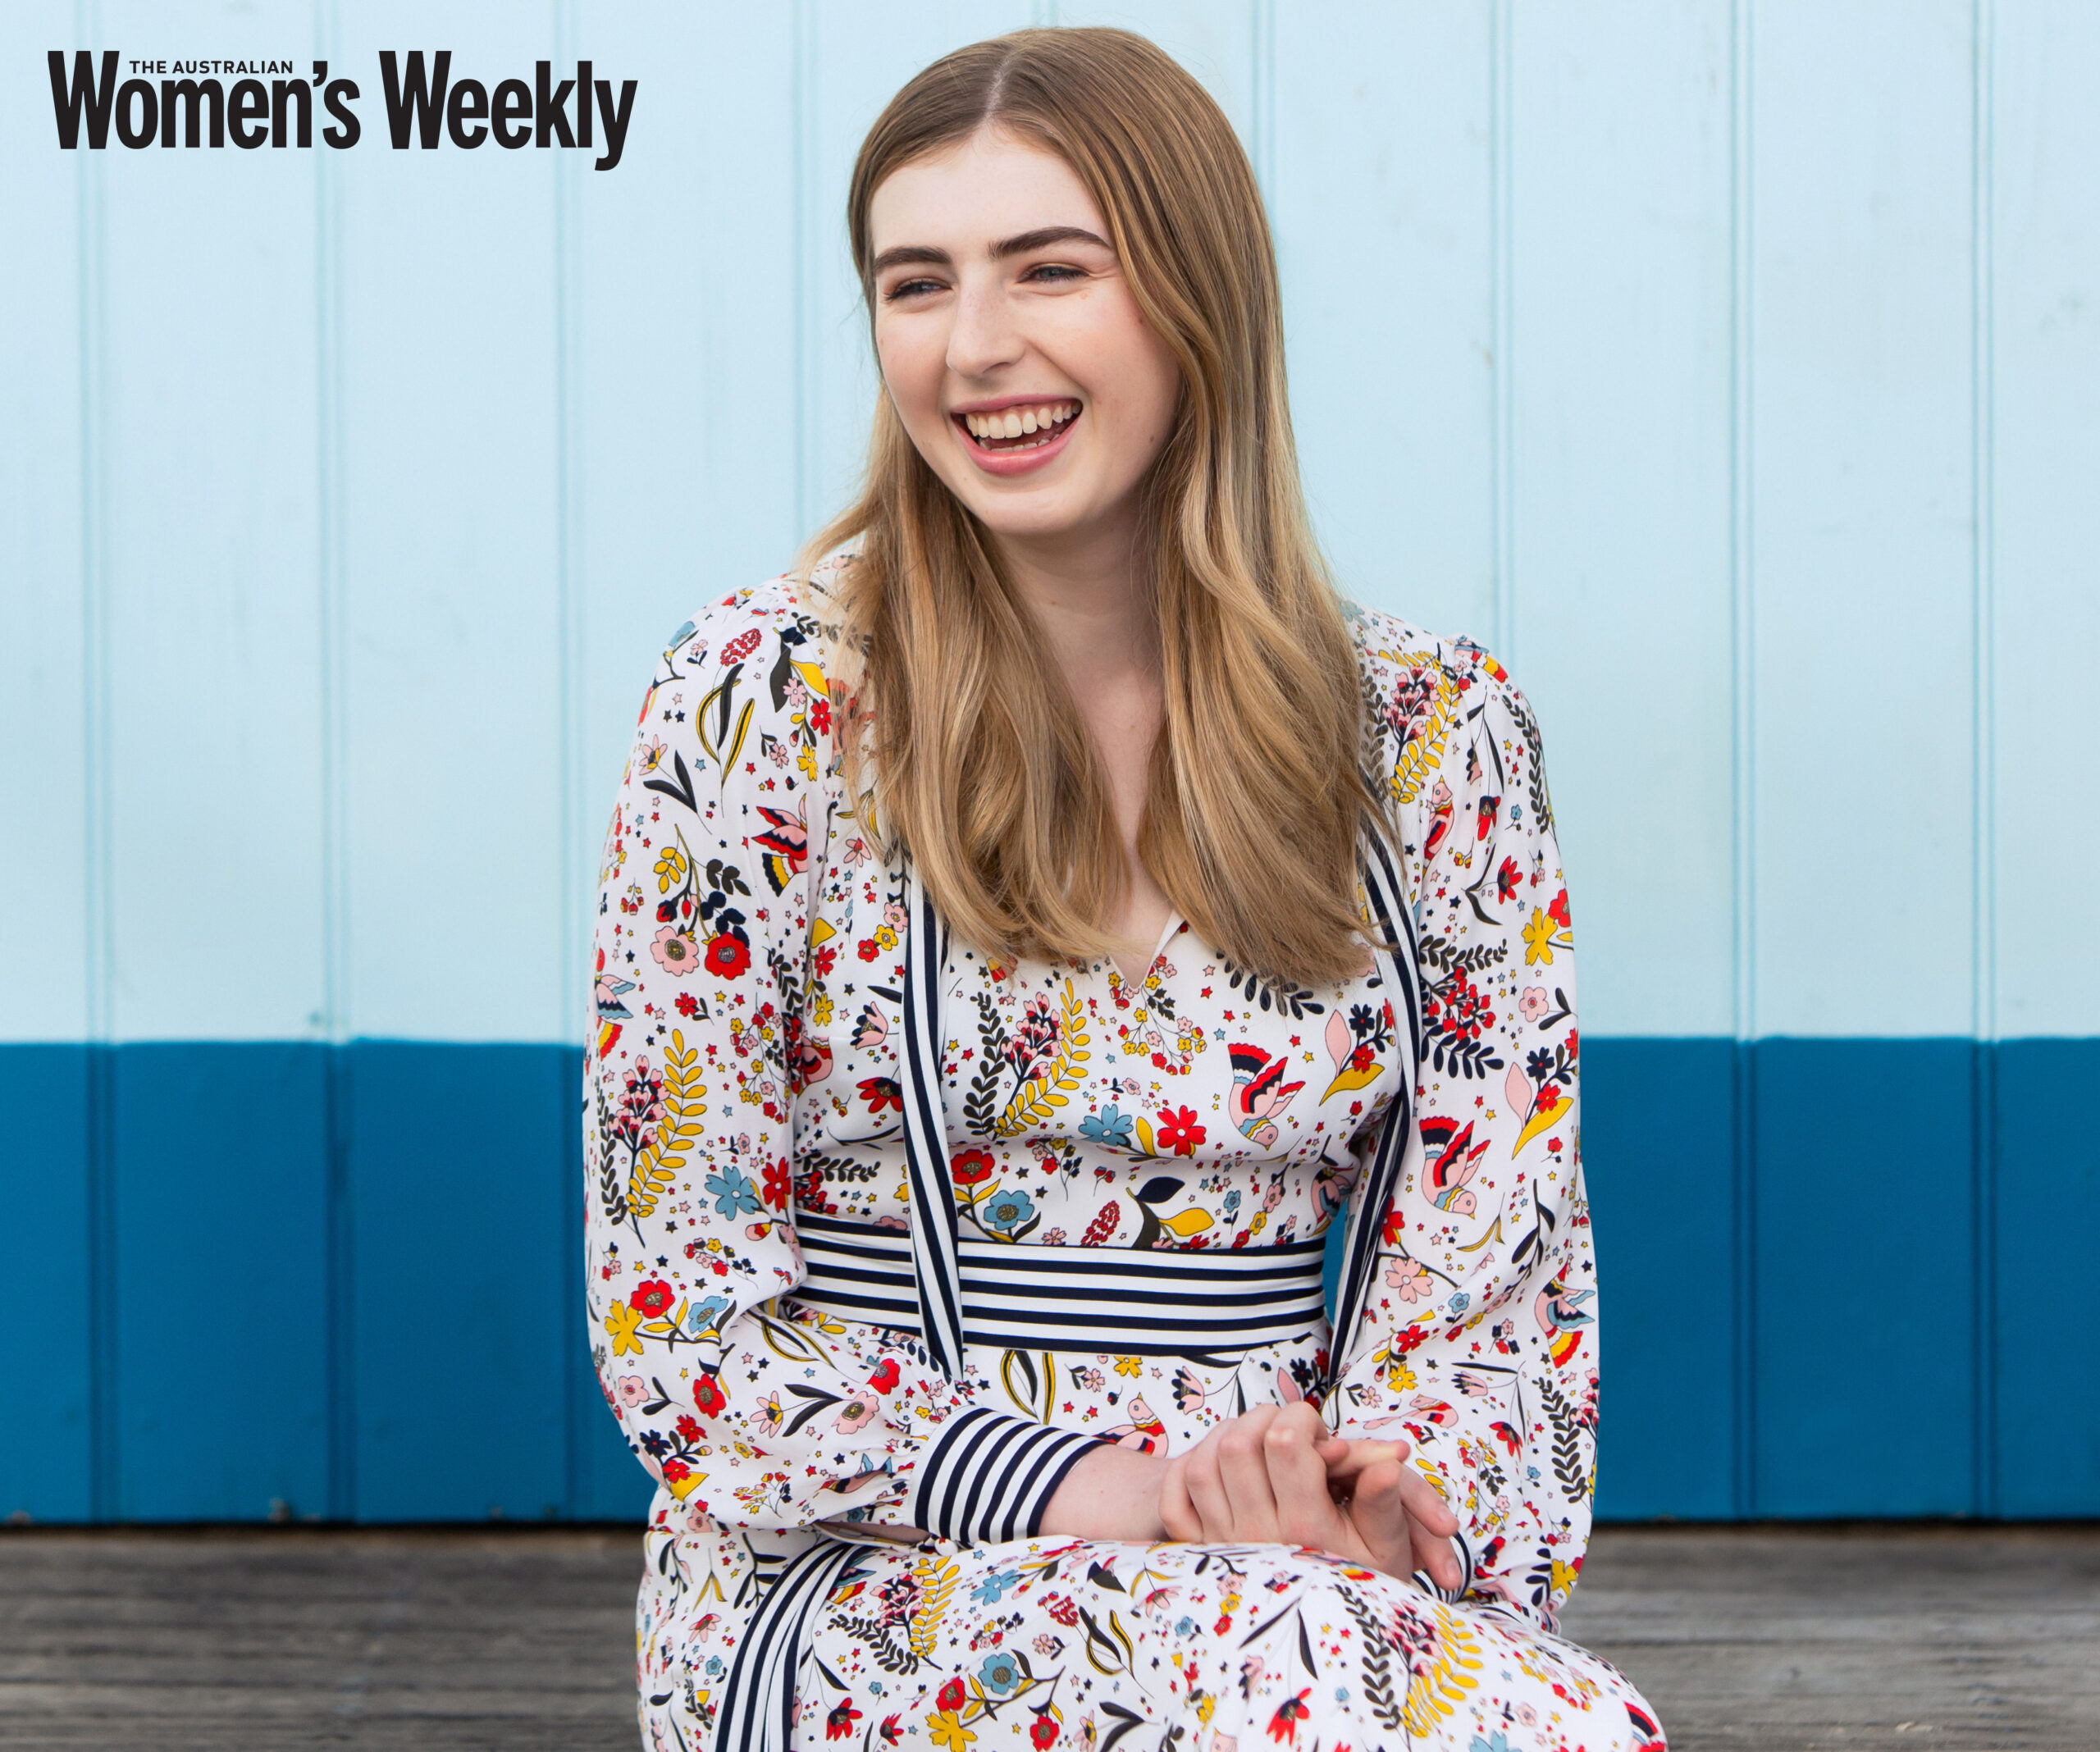 EXCLUSIVE: Meet Georgie Stone, the amazing transgender activist about to star on Neighbours